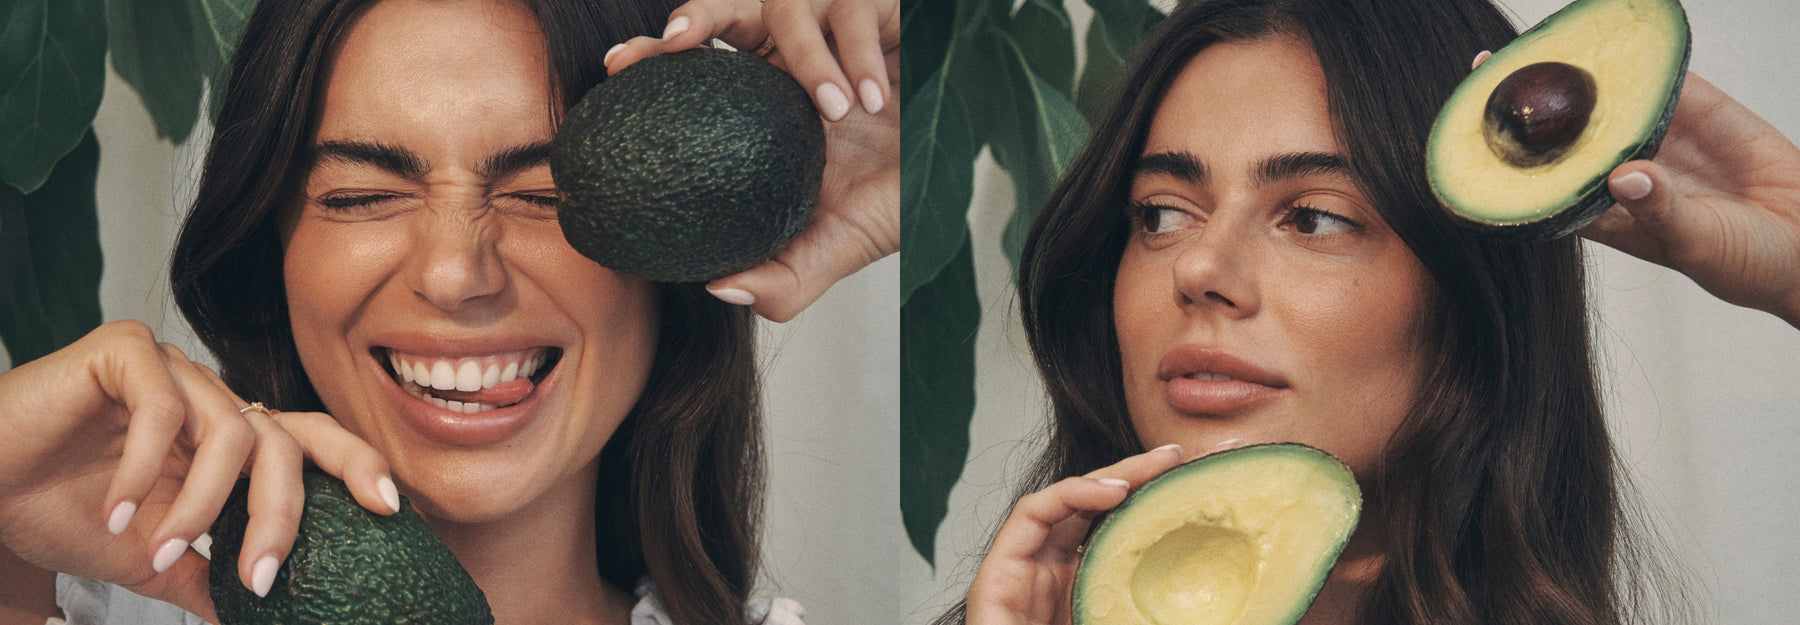 Why Avocado oil is the go-to natural beauty ingredient!